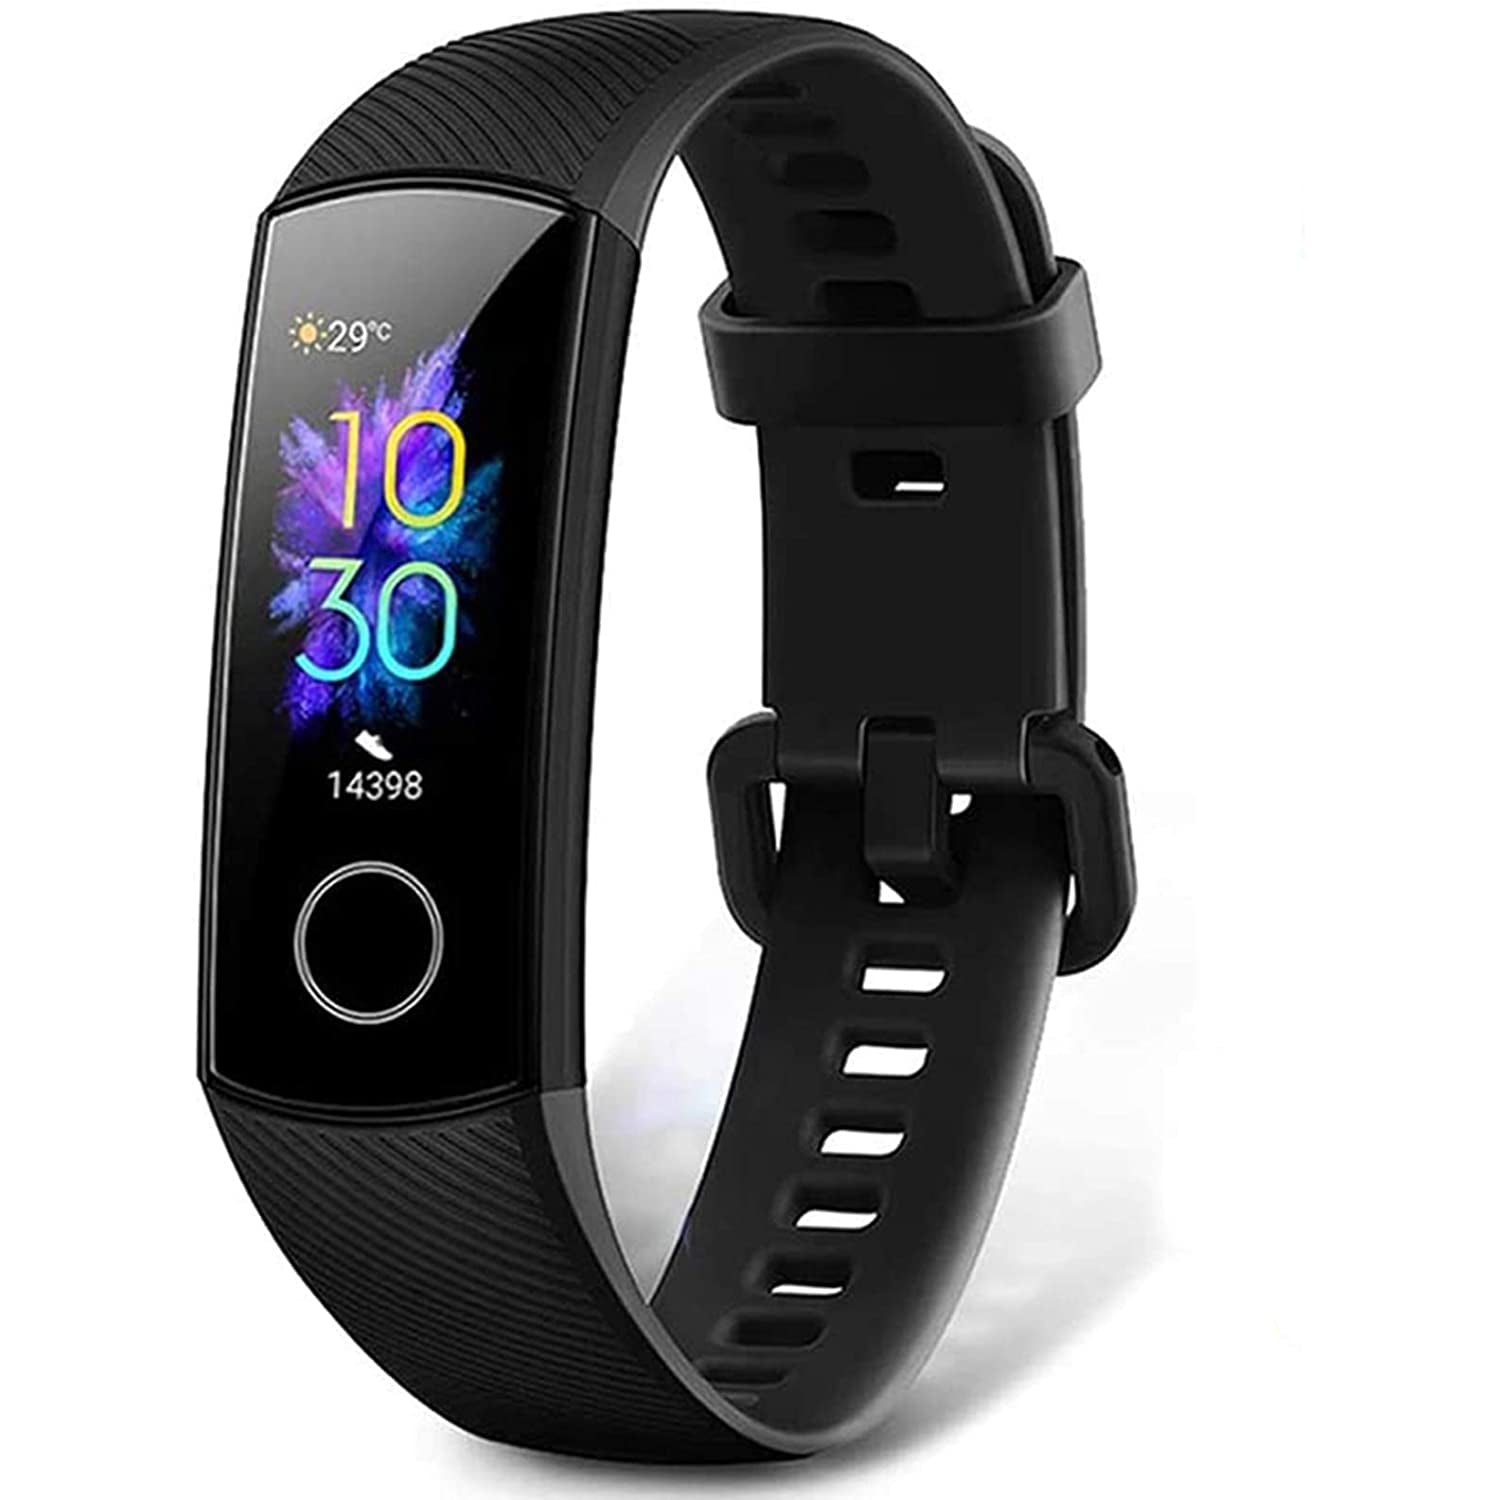 HONOR Band 5 Fitness Tracker with SpO2 Heart Rate and Sleep Monitor - Black - Refurbished Pristine